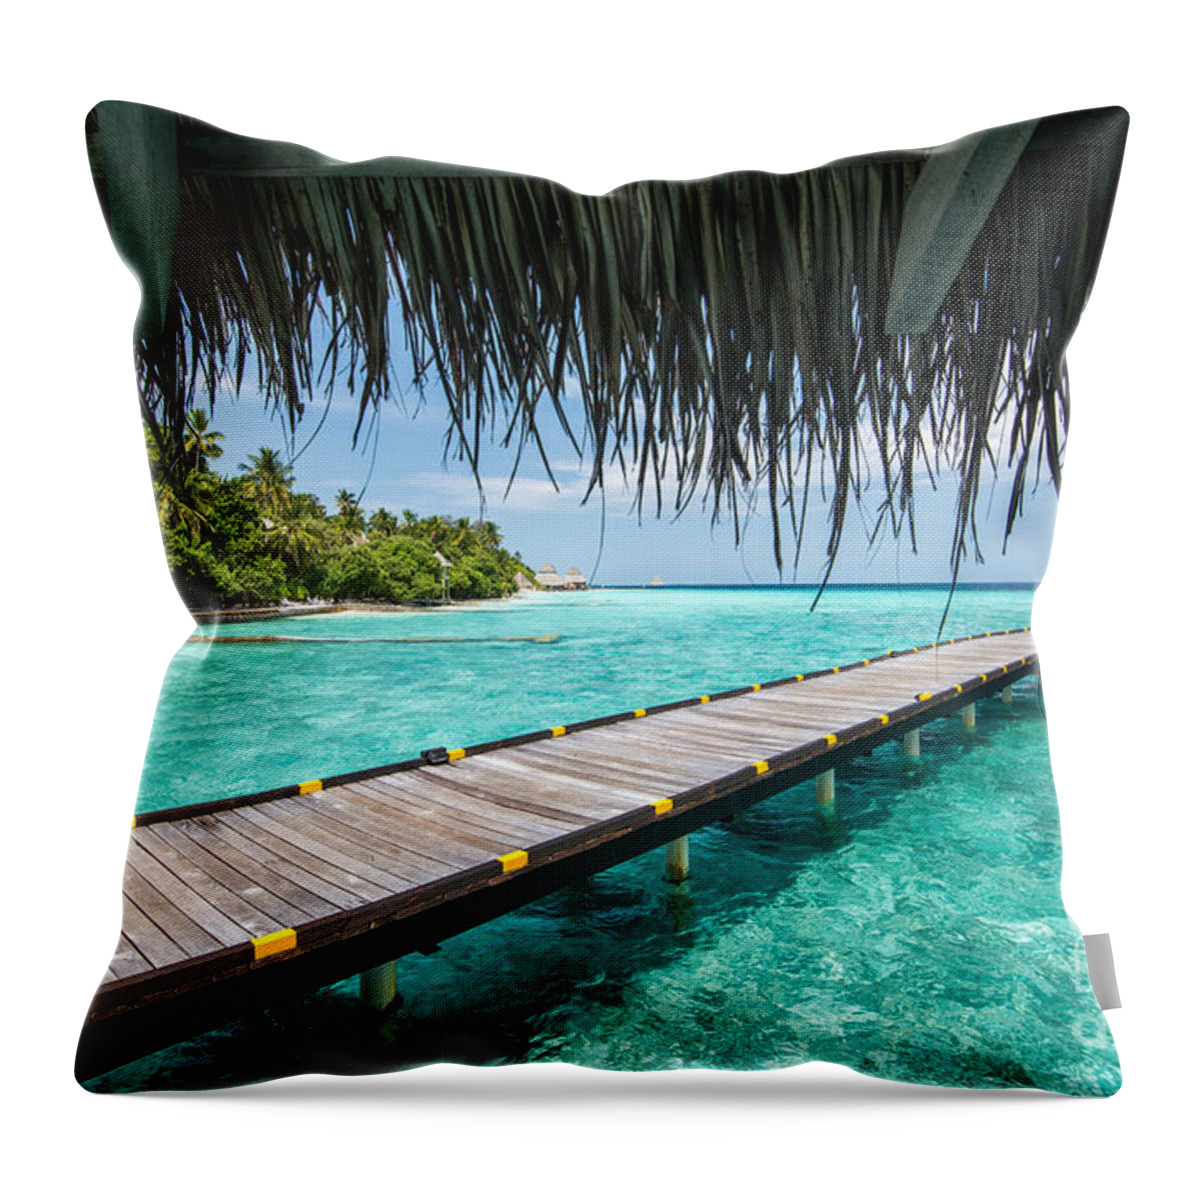 Boardwalk Throw Pillow featuring the photograph Heavenly View by Hannes Cmarits